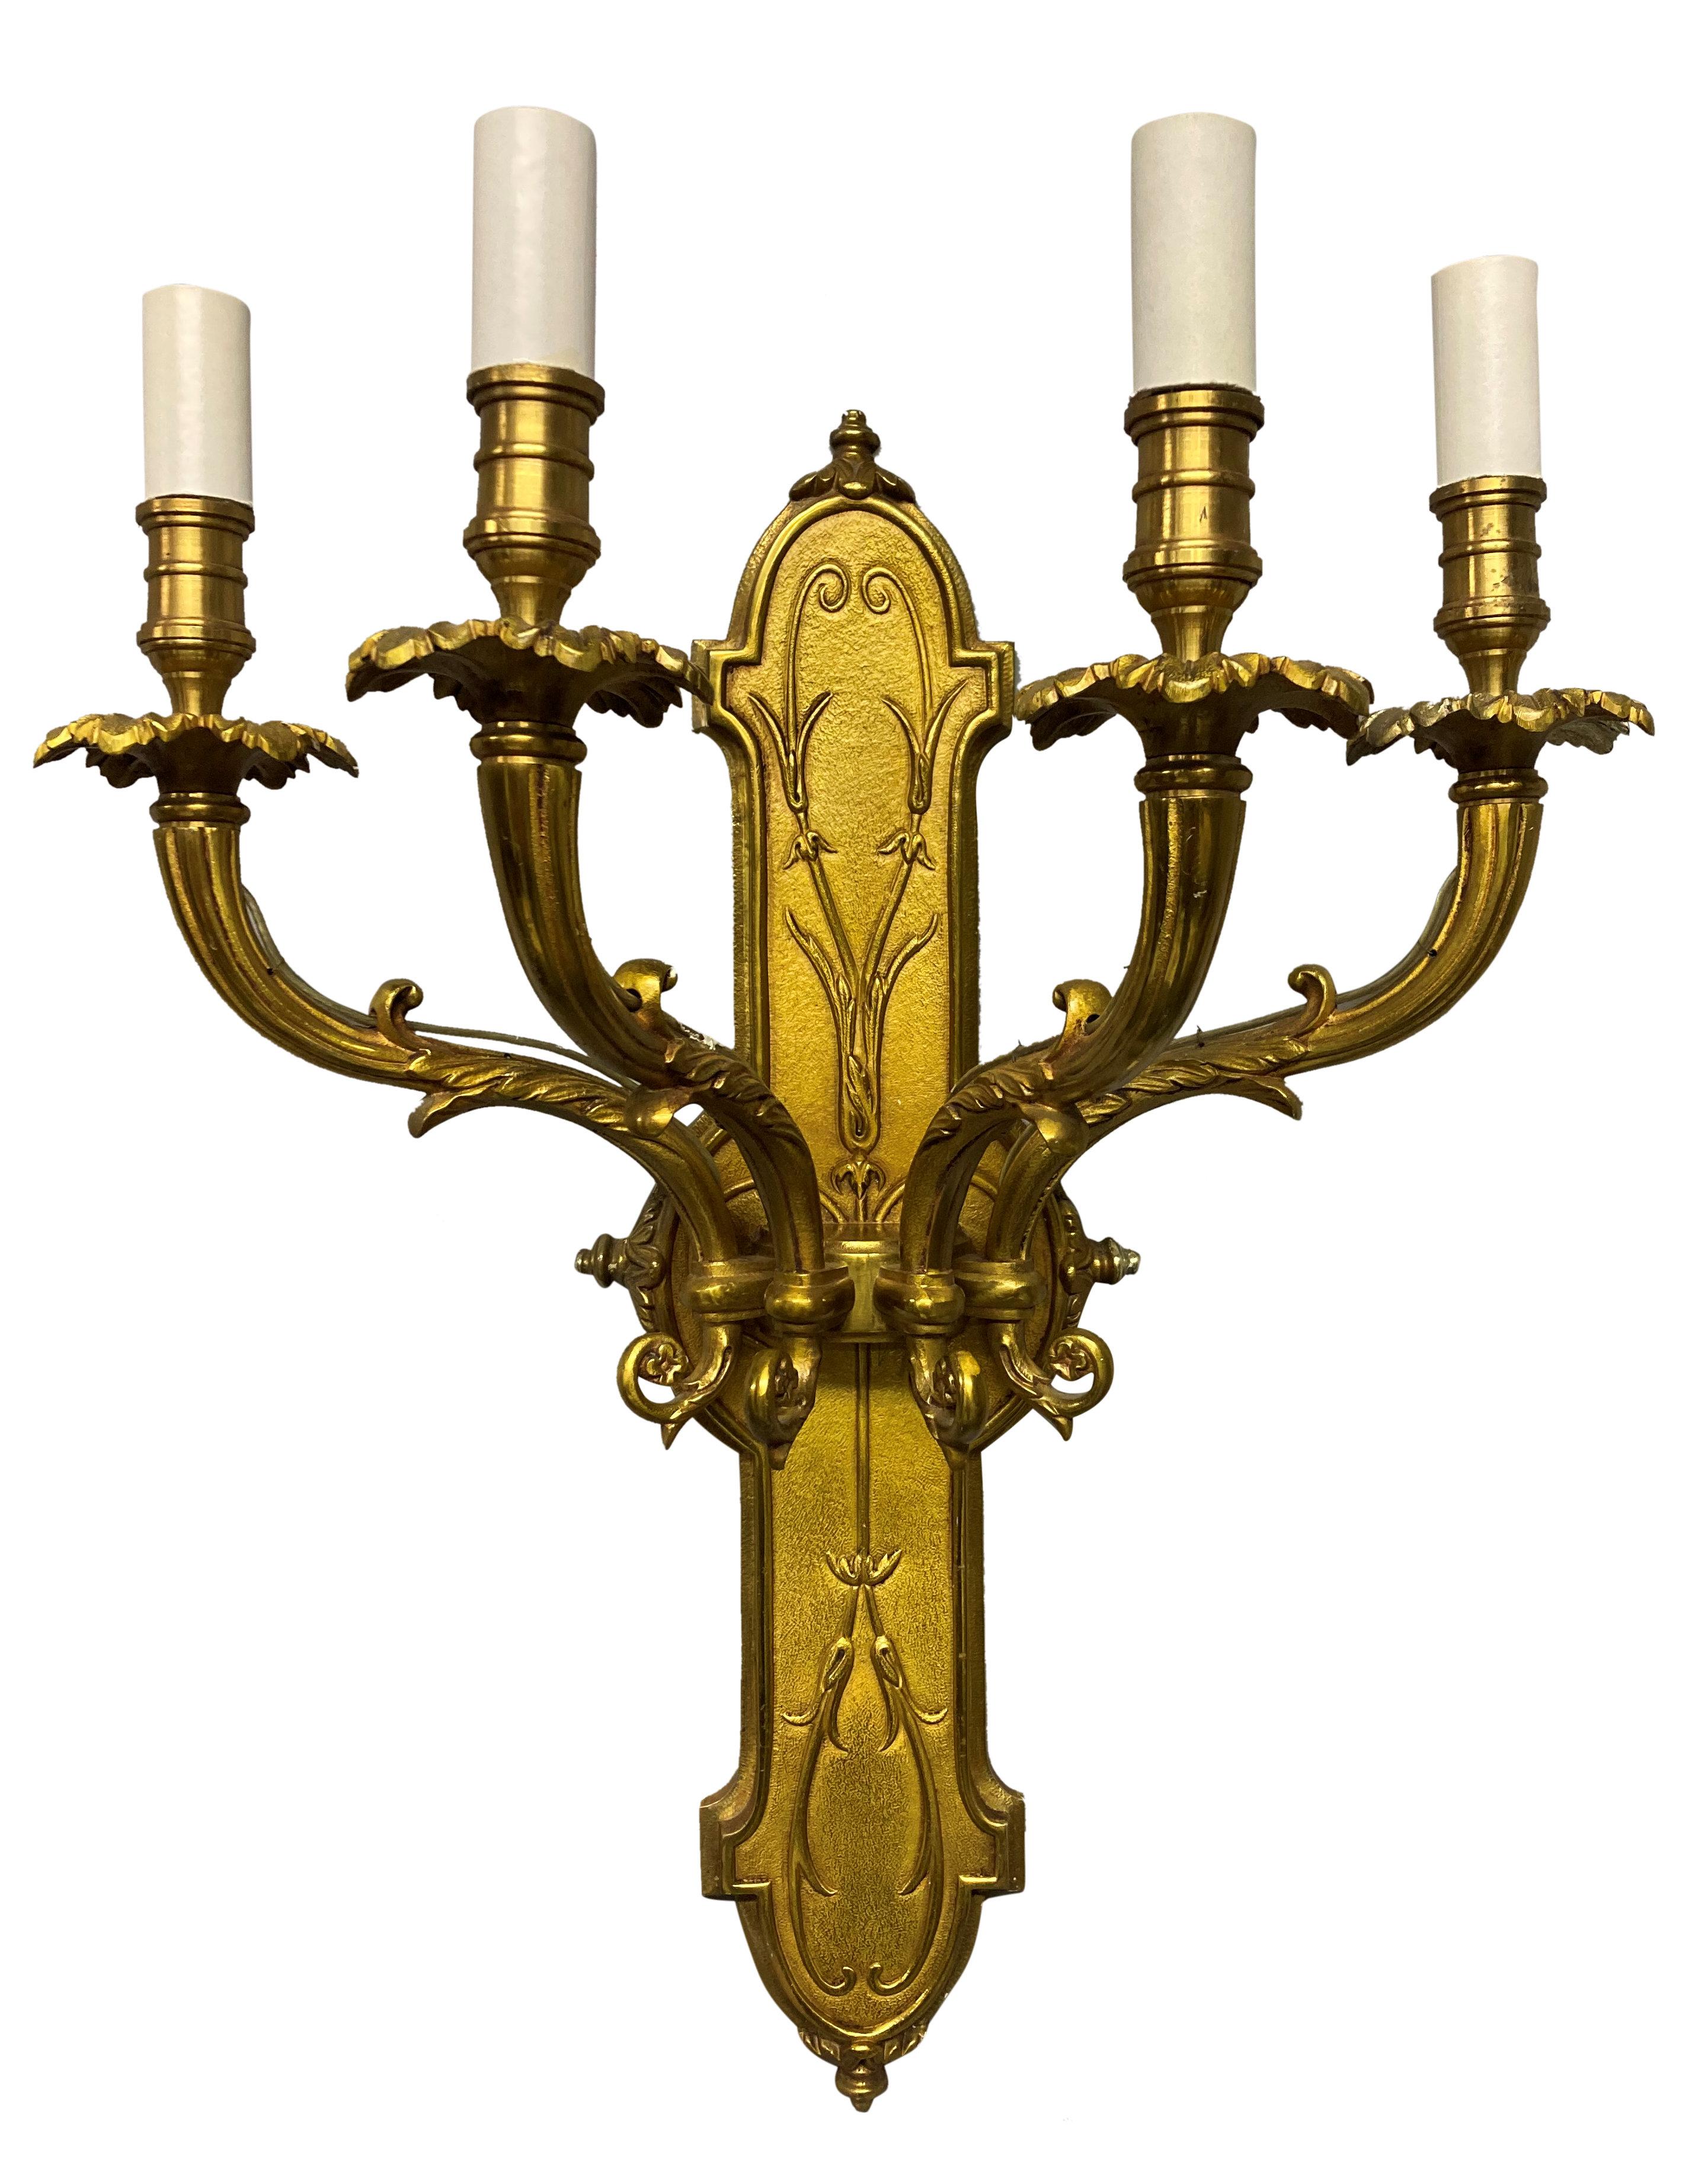 A set of large French gilt bronze four branch wall lights, formerly of Claridges. There are another ten of these in seperate listings.